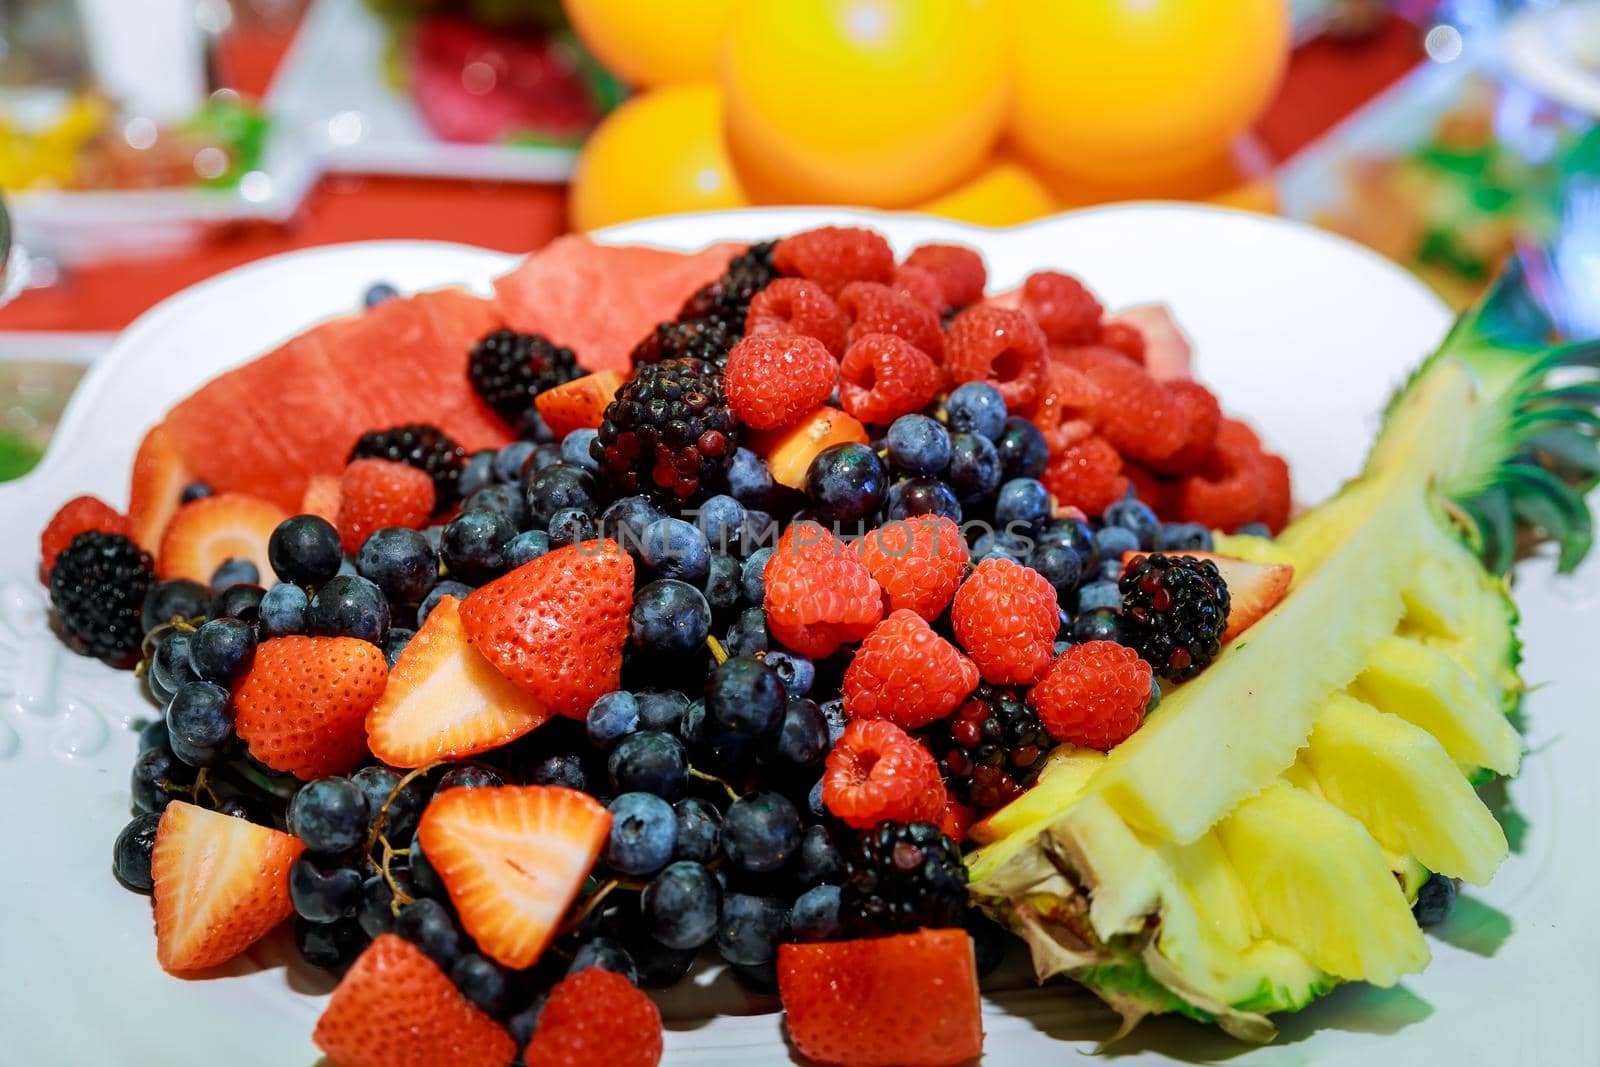 Fruits on a plate salad with fresh fruits and berries